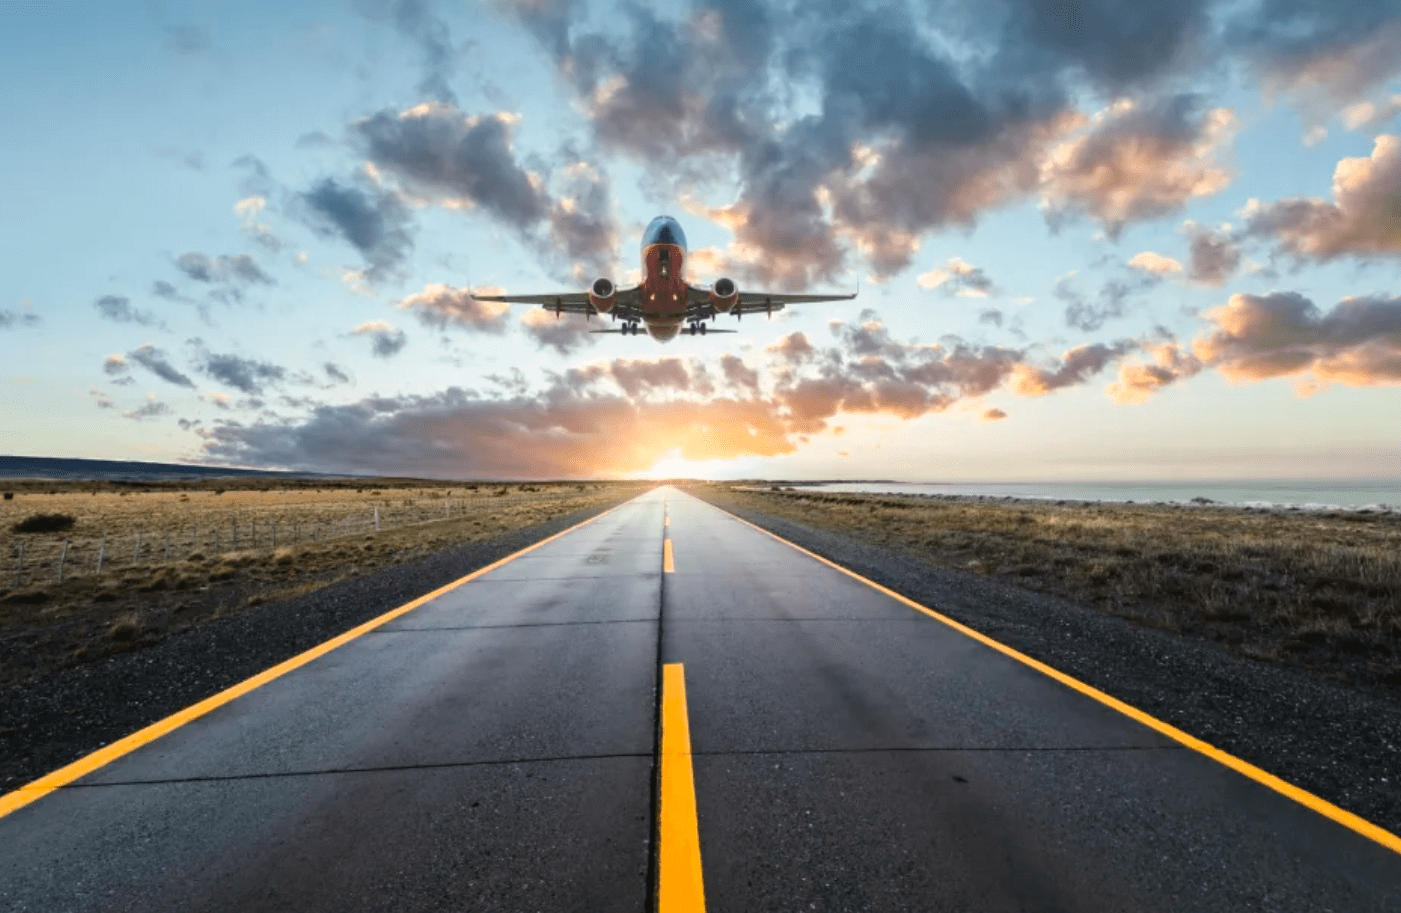 The long-term benefits of Australia’s 4 stage COVID-19 plan on travel stocks